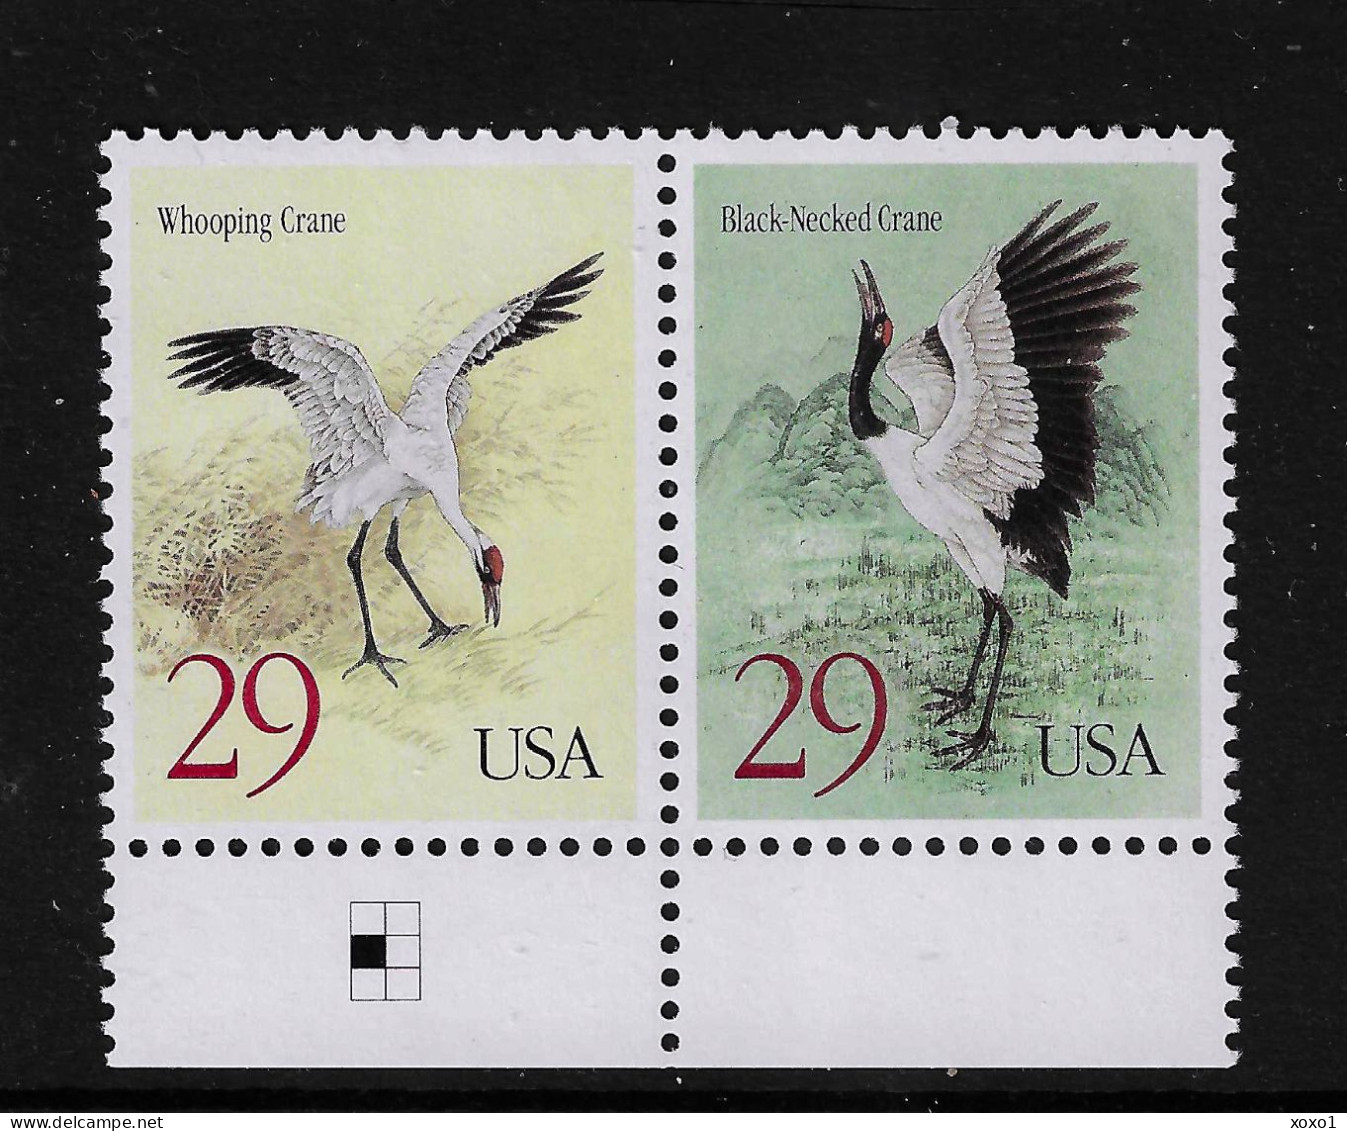 USA 1994 MiNr. 2504 - 2505 United States Joint Issues China Birds Black-necked Crane, Whooping Crane 2v MNH **  2,20 € - Emissions Communes